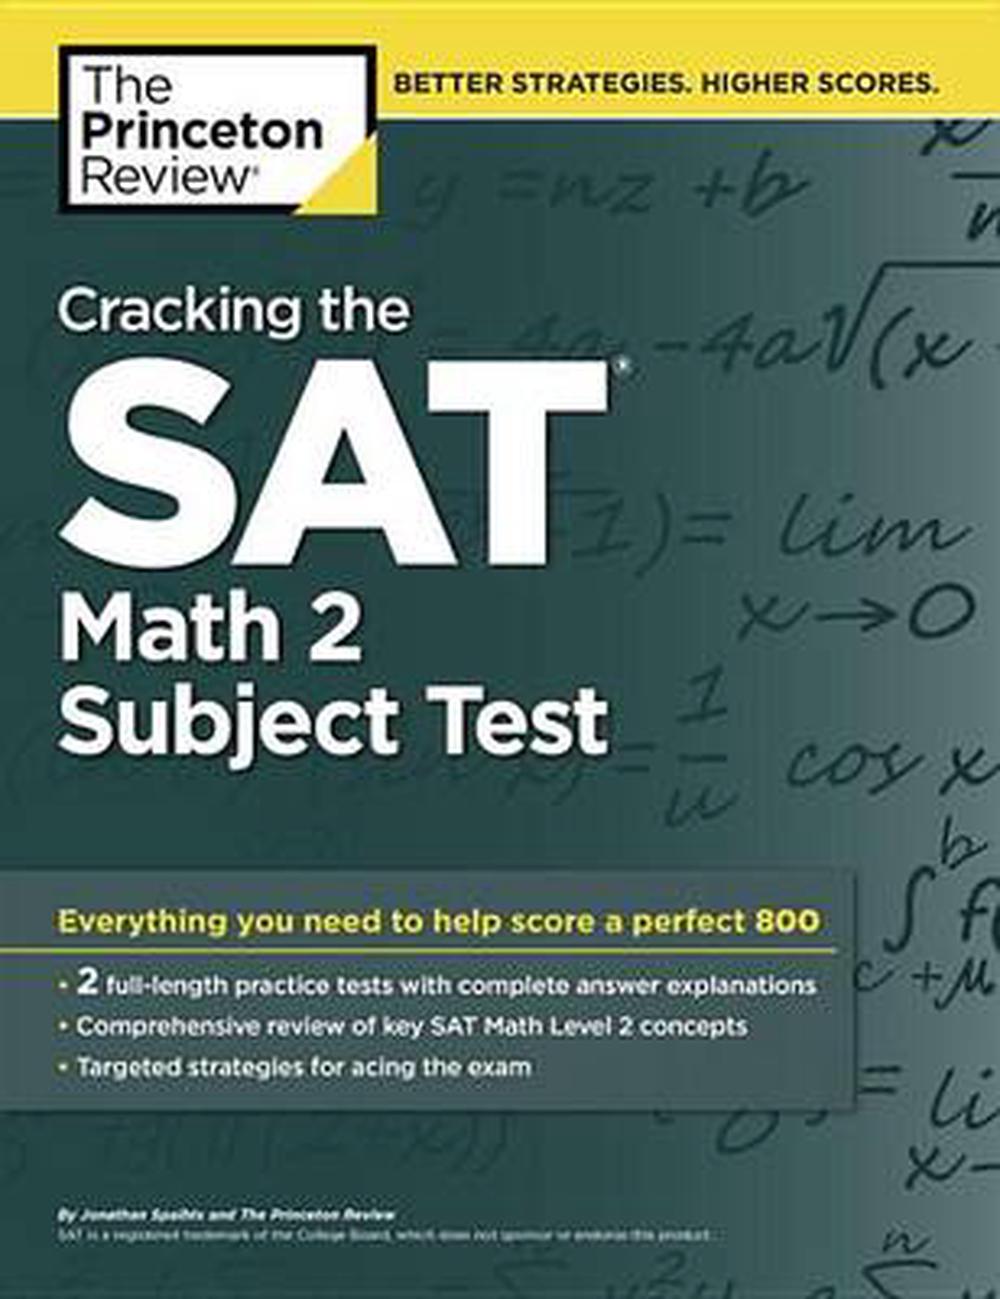 cracking-the-sat-math-2-subject-test-by-princeton-review-paperback-9780804125604-buy-online